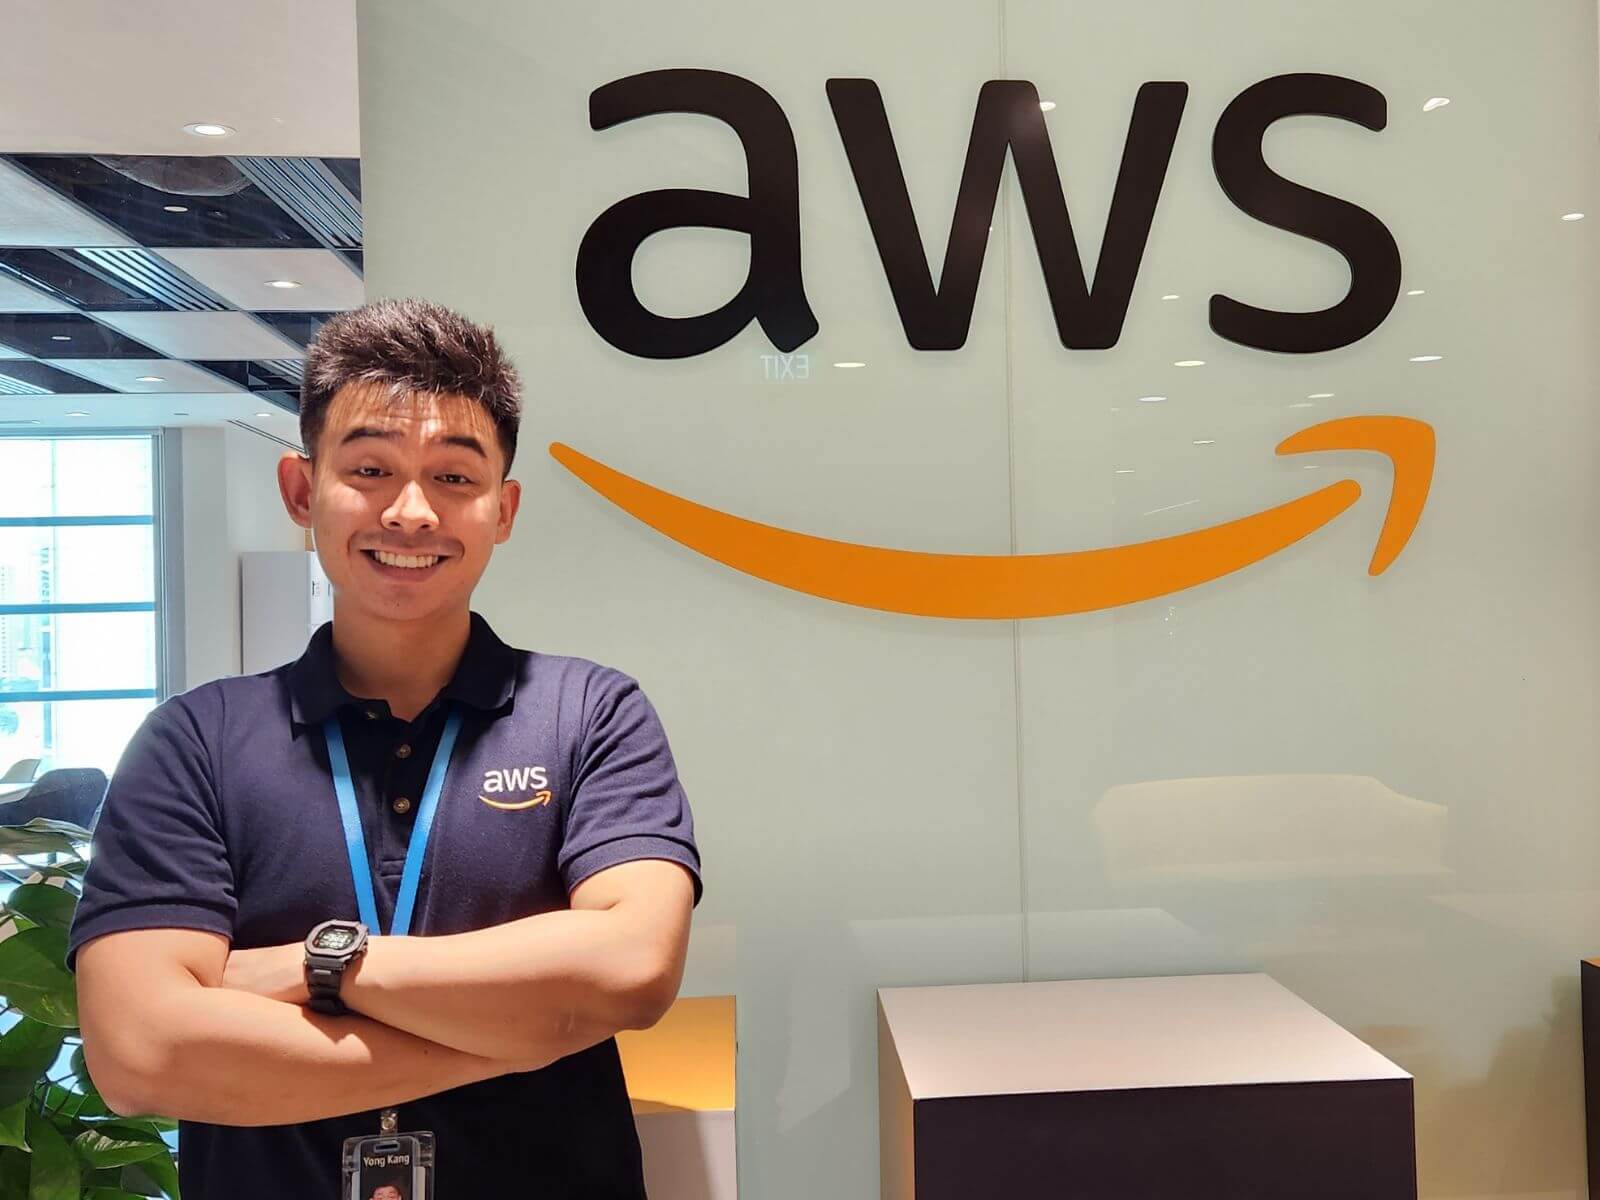 DigiPen Singapore Graduate Khoo Yong Kang poses in front of the Amazon logo